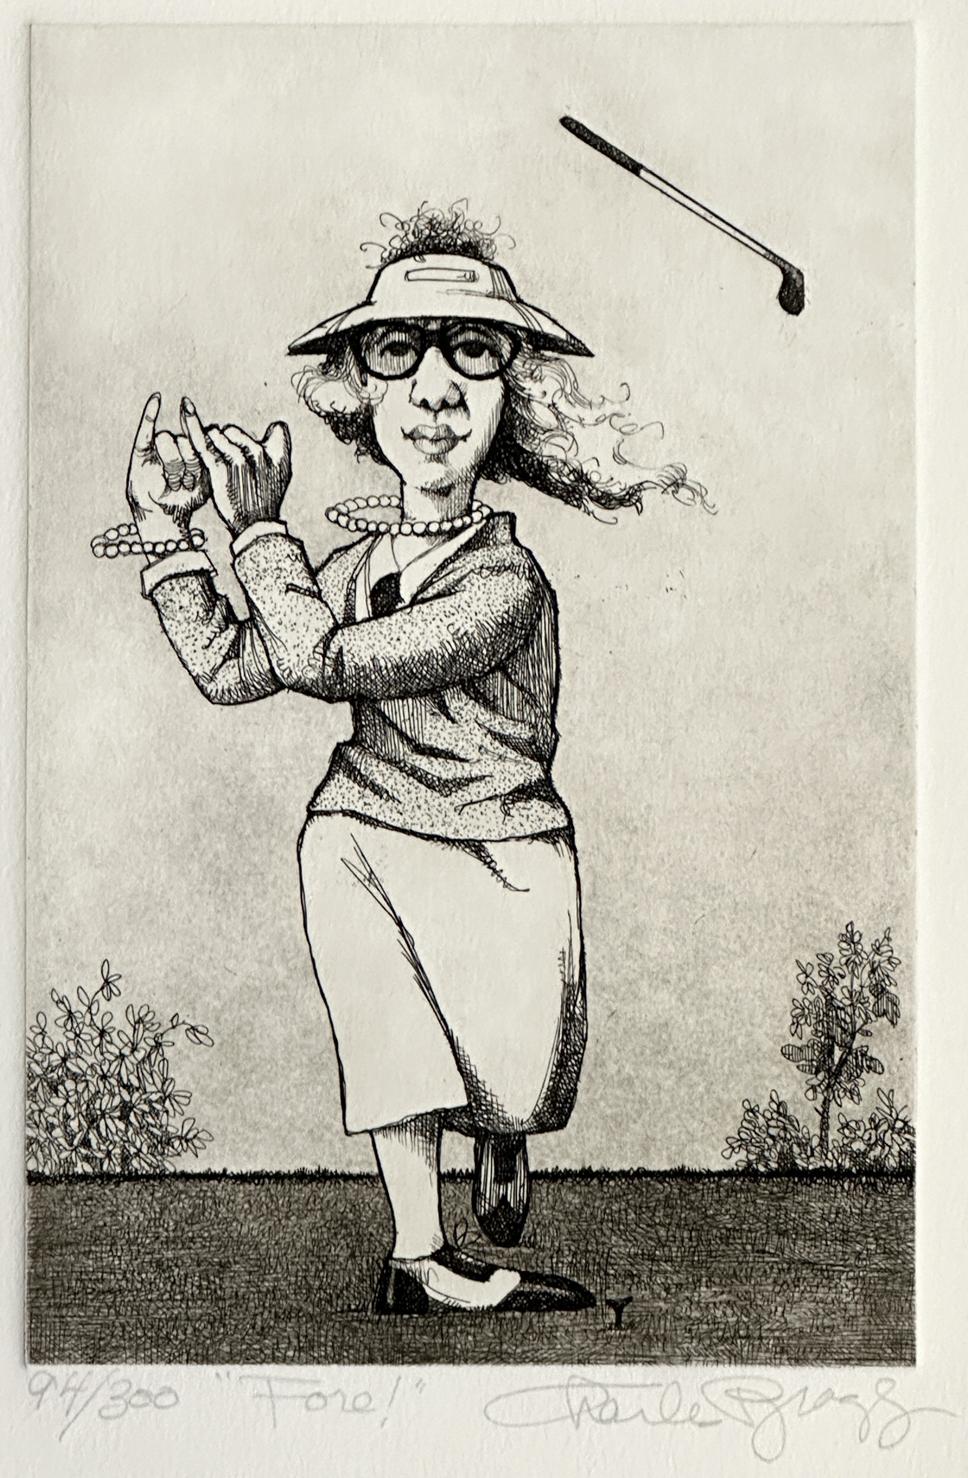 Women In Golf : Fore! 1988 Signed Limited Edition Art Etching - American Realist Print by Charles Bragg